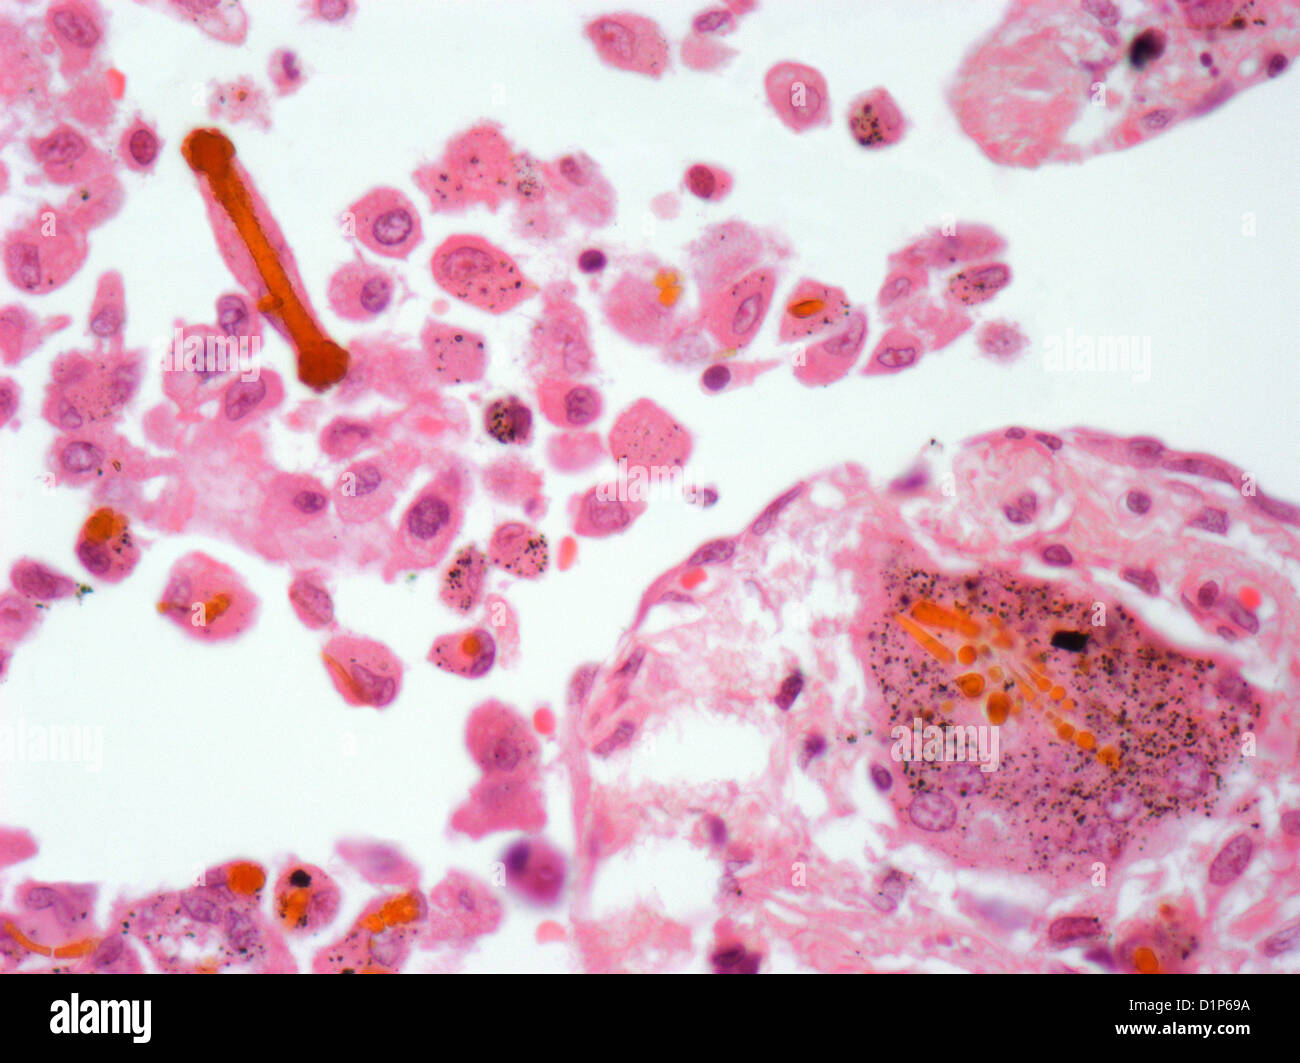 Asbestos in lung tissue, light micrograph Stock Photo